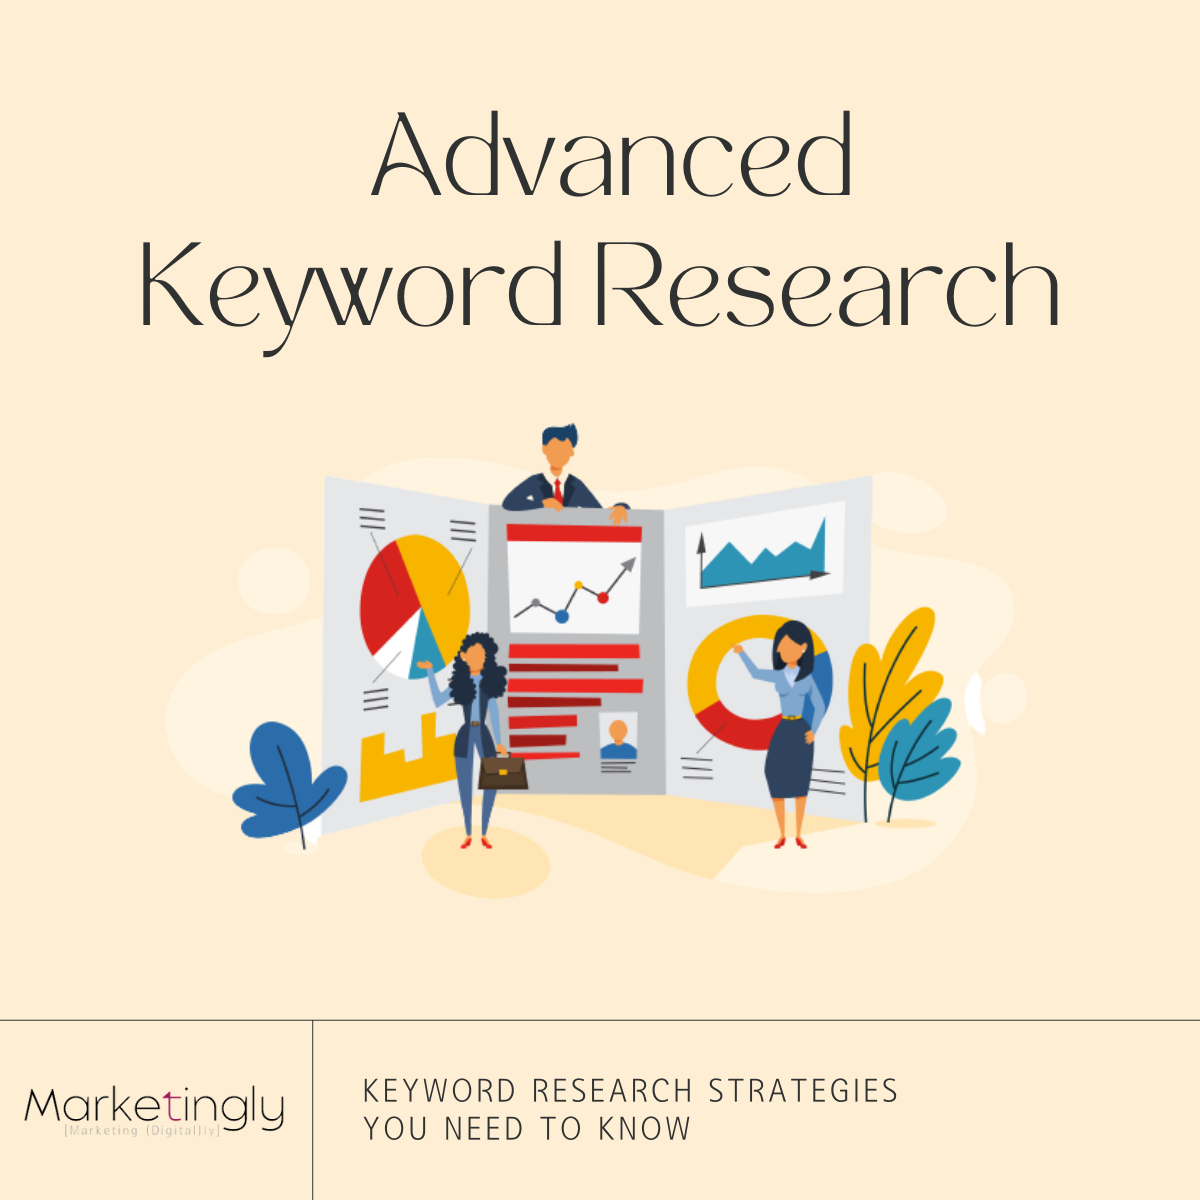 Advanced Keyword Research Strategies You Need To Know